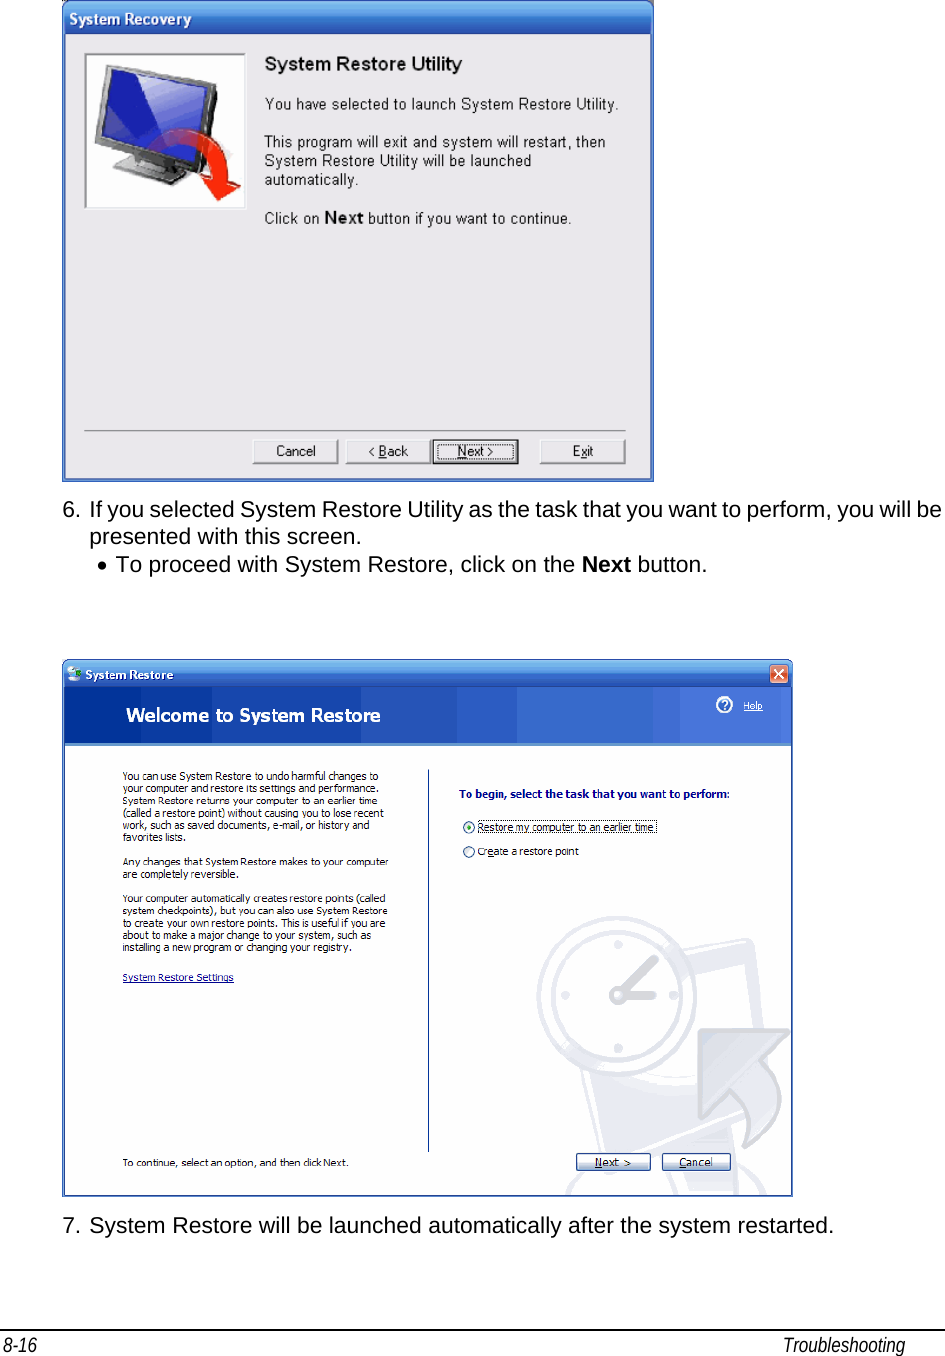 8-16                                                                                                                                                             Troubleshooting                                                 6. If you selected System Restore Utility as the task that you want to perform, you will be presented with this screen. • To proceed with System Restore, click on the Next button.     7. System Restore will be launched automatically after the system restarted.  